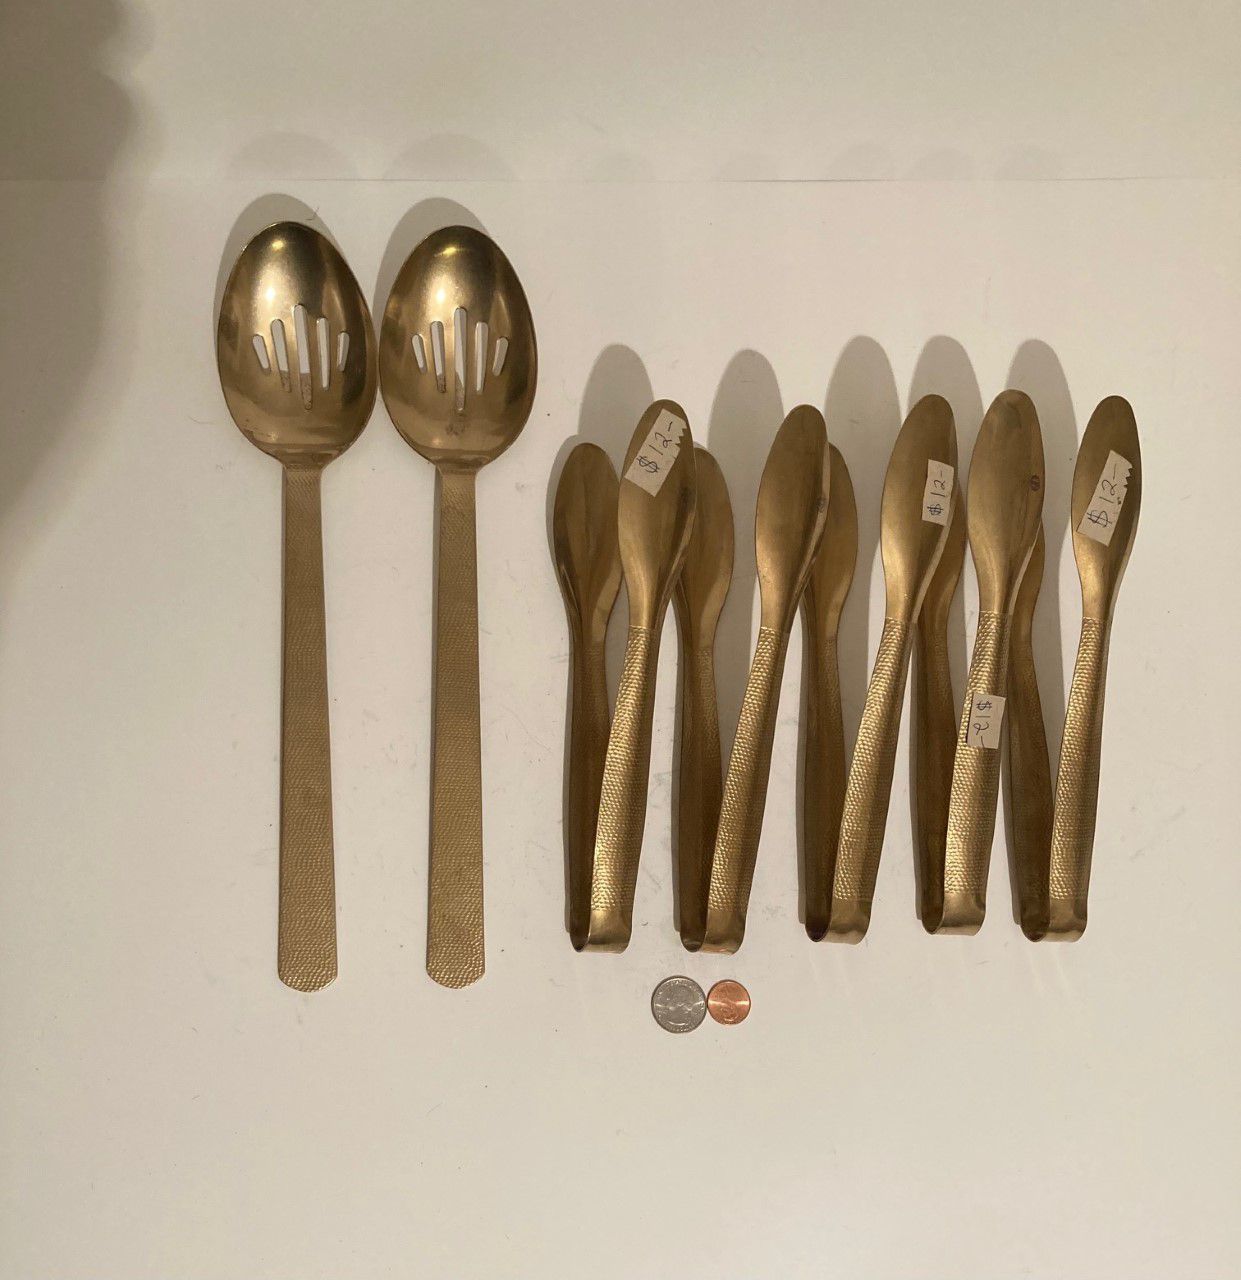 Vintage Set of 7 Brass Serving Utensils, 2 Strainers Spoons and 5 Tongs, 13" and 9" Long Each One, Heavy Duty, Quality, Kitchen Decor, Hanging Display